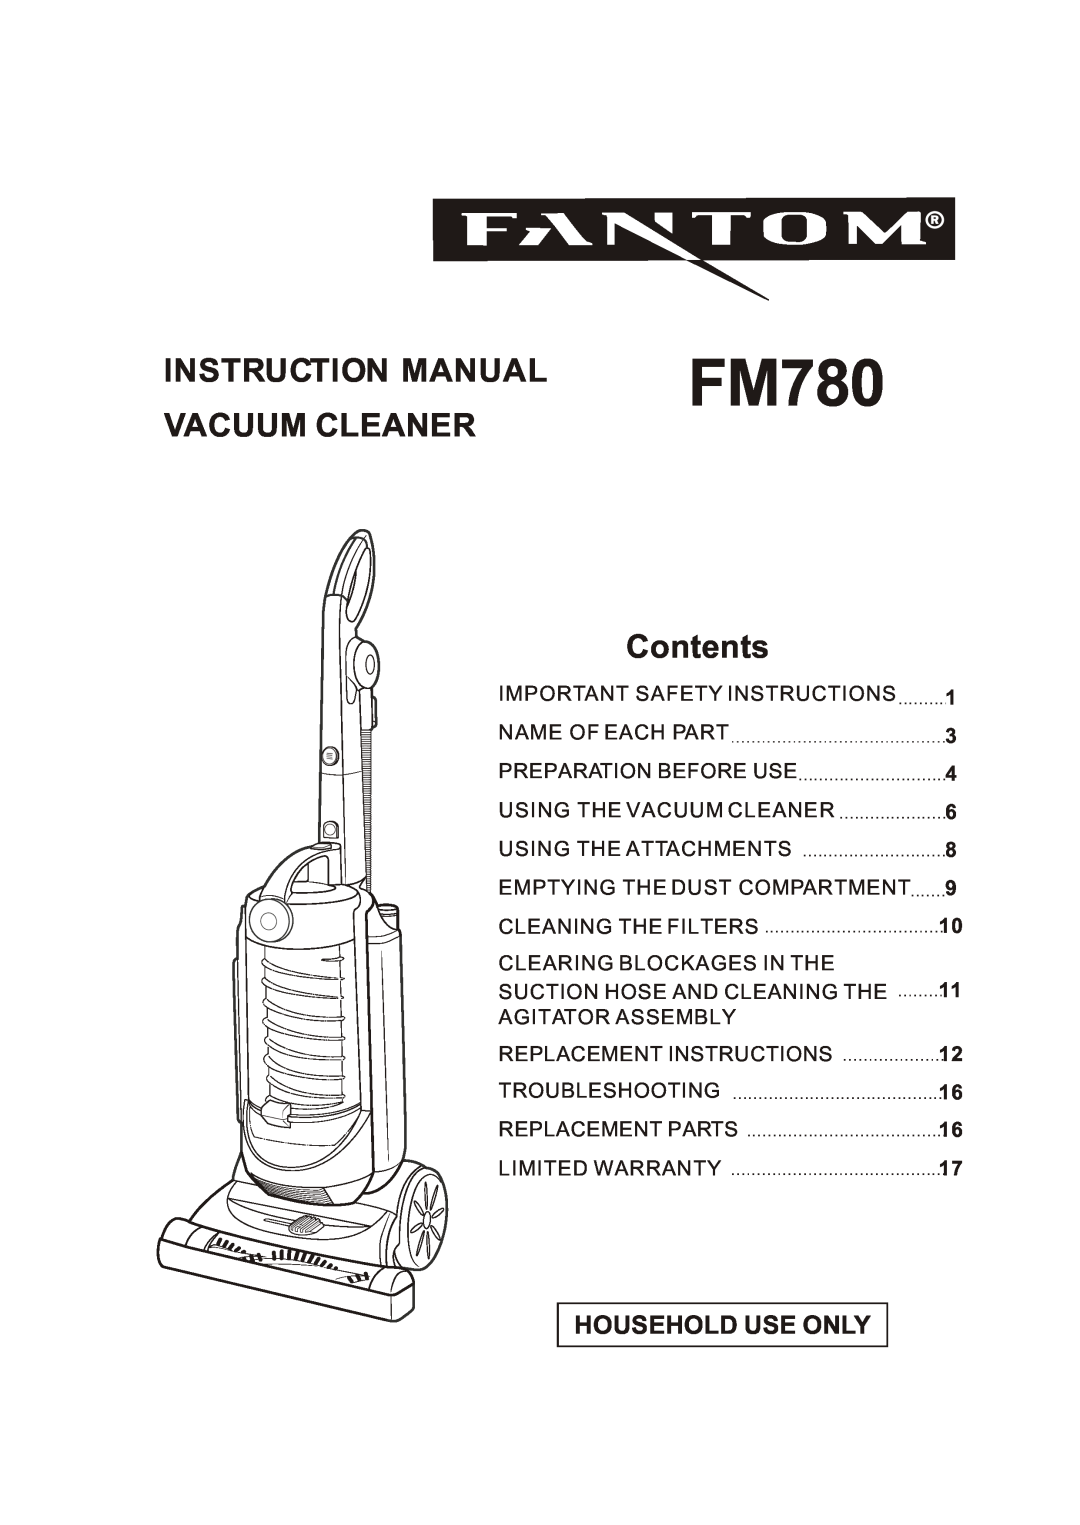 Fantom Vacuum FM780 instruction manual Vacuum Cleaner, Contents, Household Use Only 